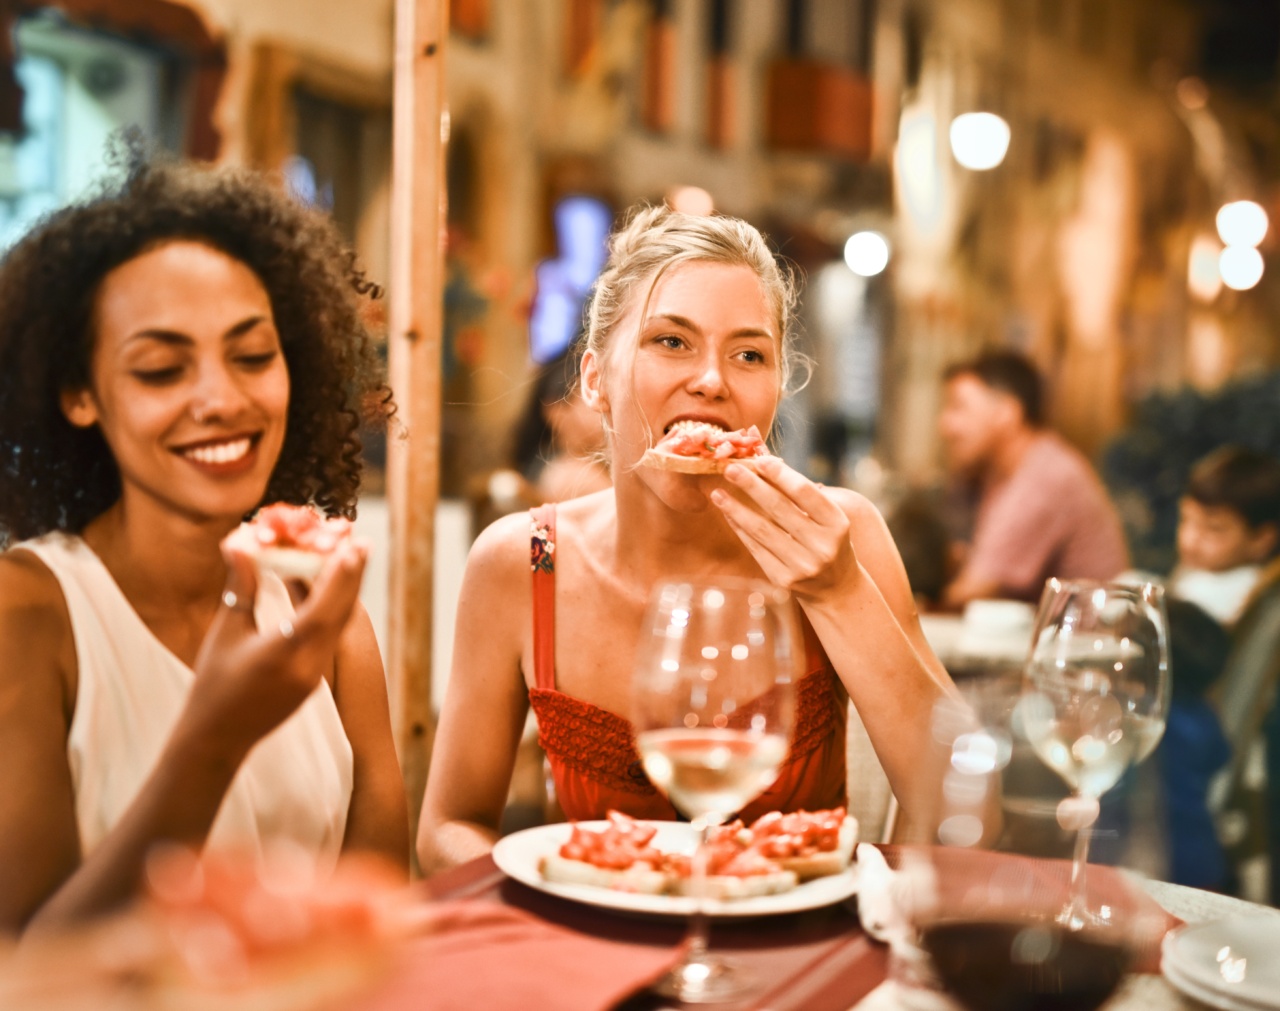 Feeling hungry after a night on the town? These foods may satisfy